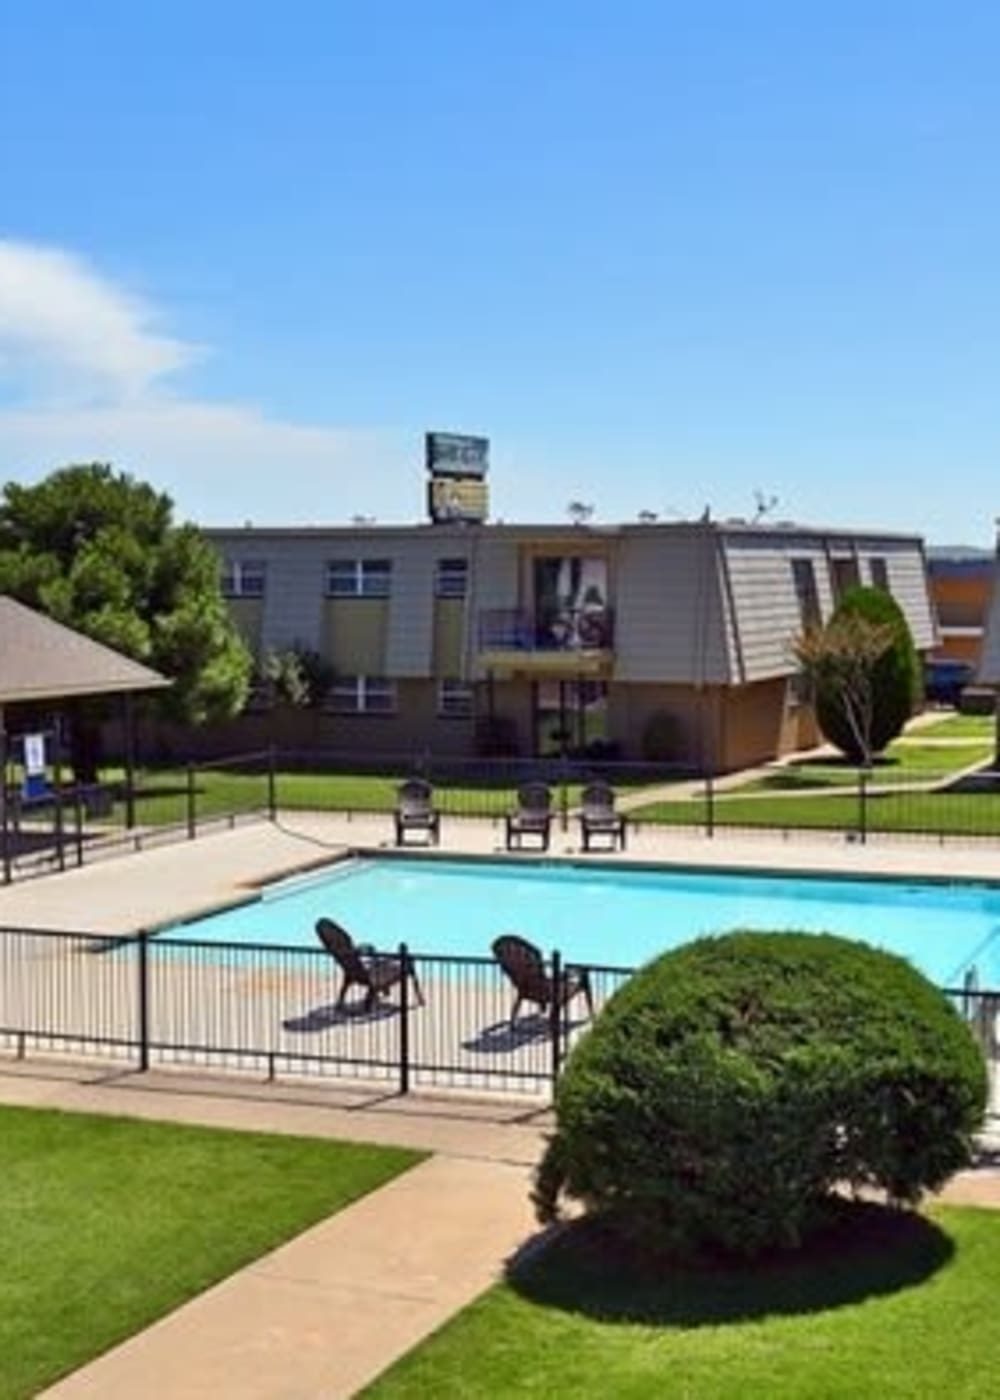 The gated community swimming pool at Regency Apartments in Lawton, Oklahoma